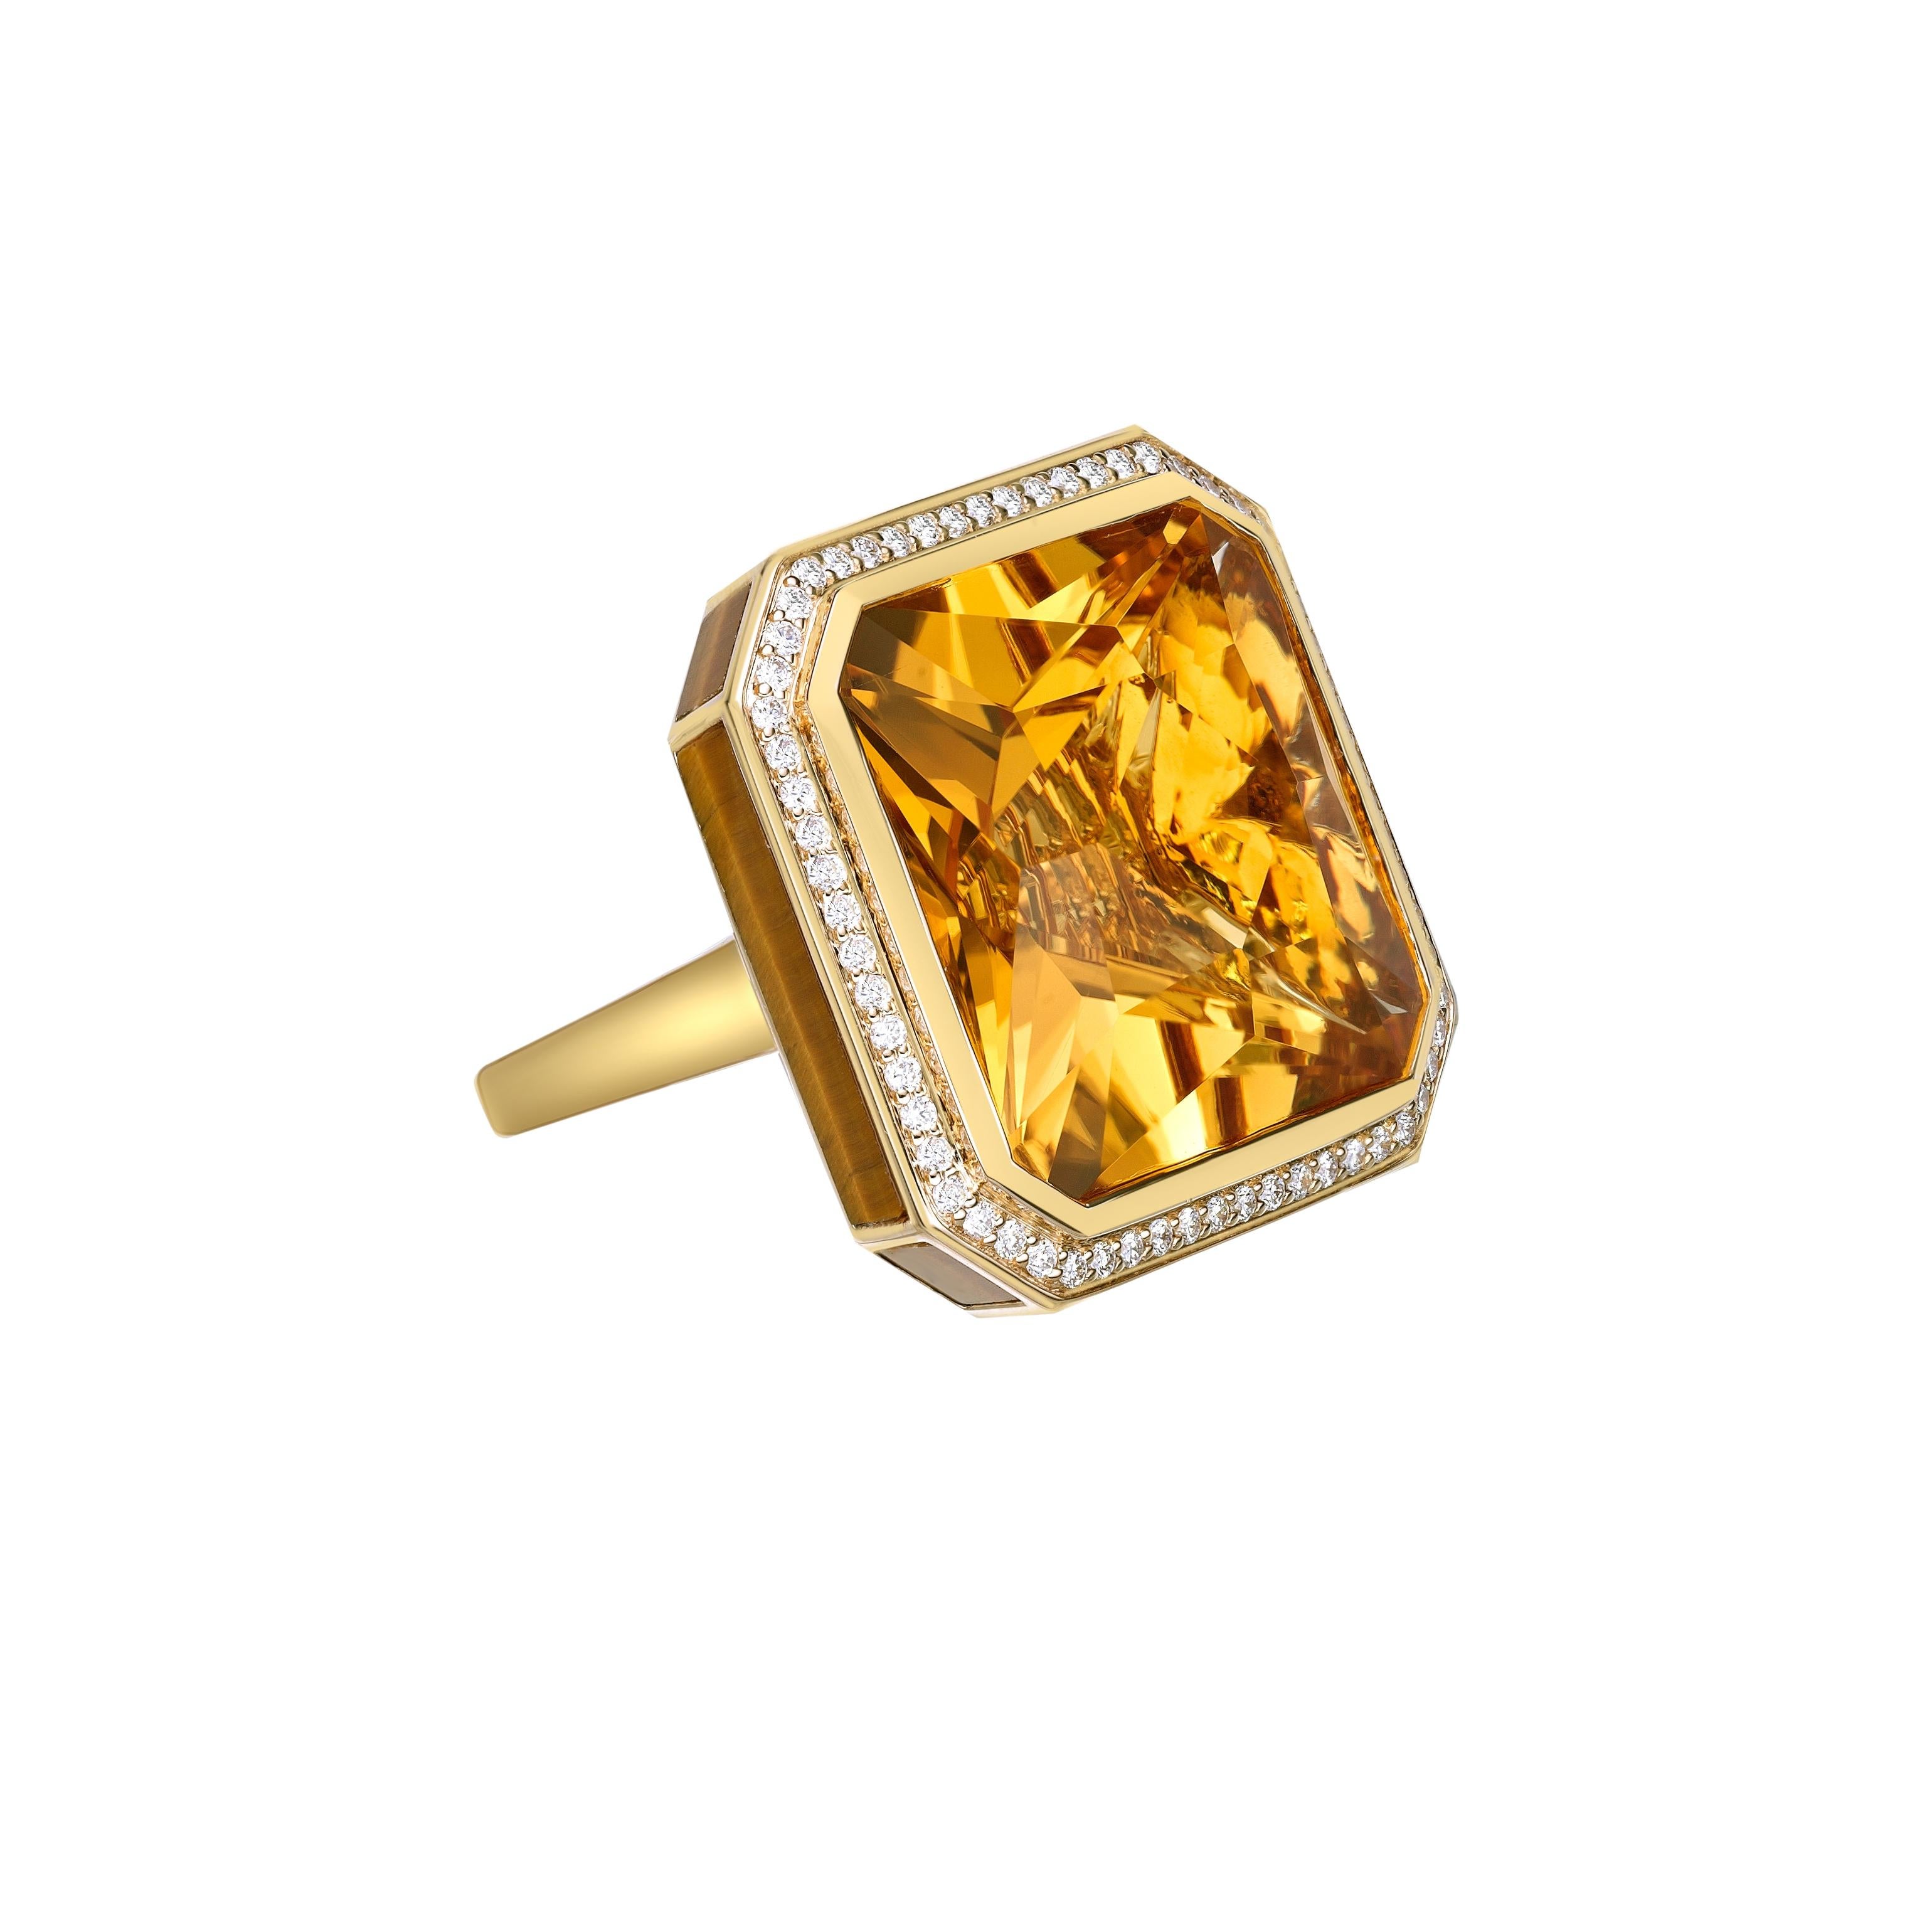 Contemporary 29.56 Carat Honey Quartz Fancy Ring in 18KYG with Tiger Eye, Garnet and Diamond. For Sale